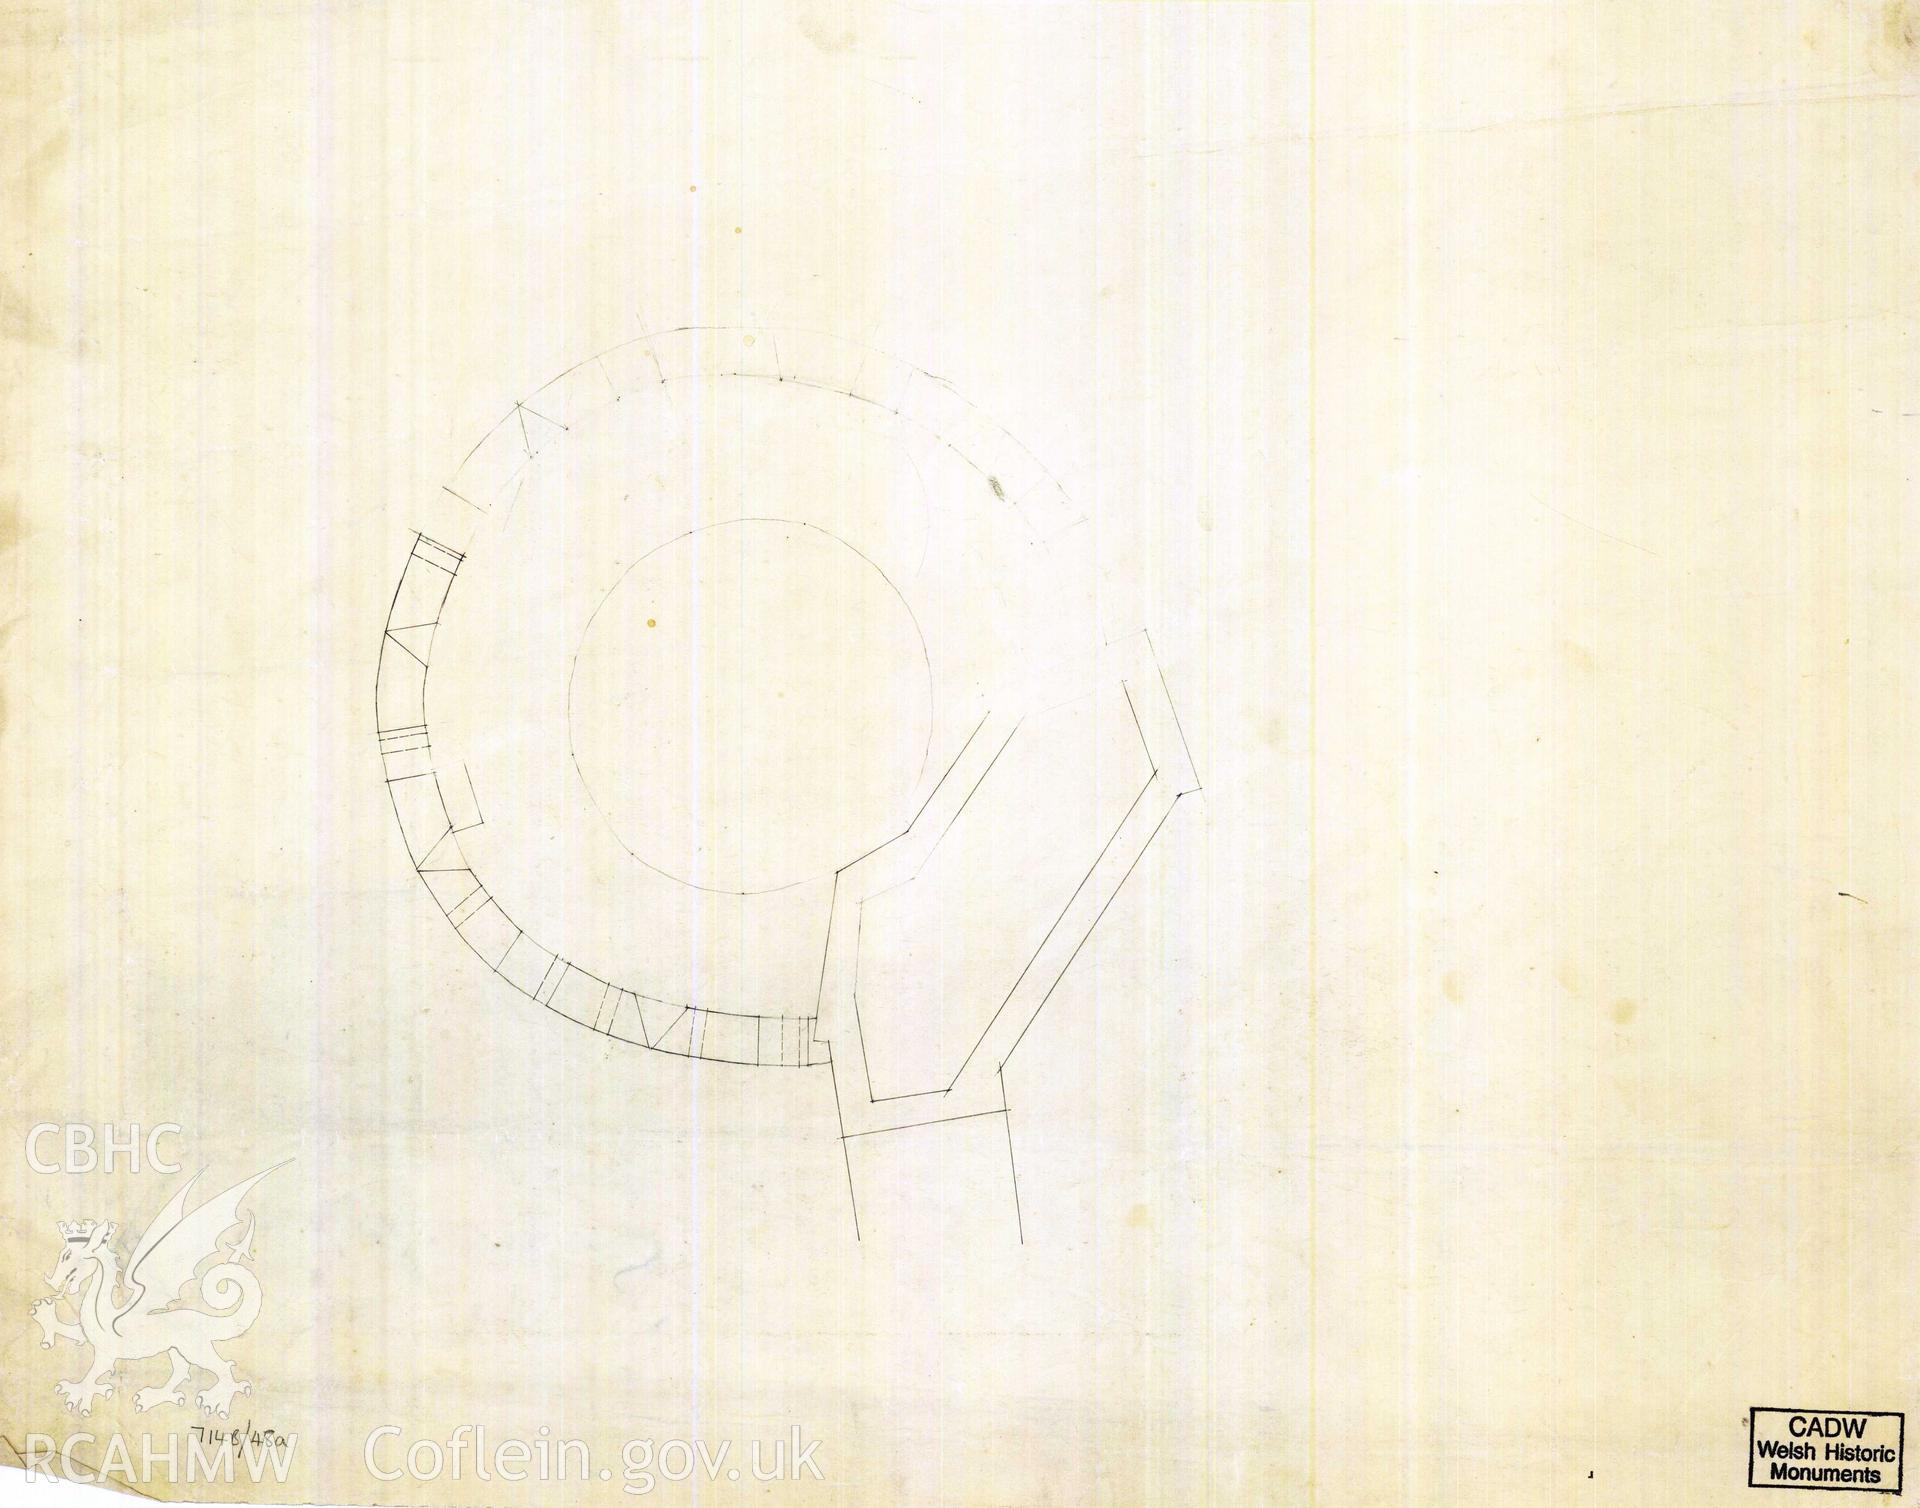 Cadw guardianship monument drawing of Caerphilly Castle. SW tower, parapet, plan. Cadw ref. no: 714B/48a. Scale 1:[48].